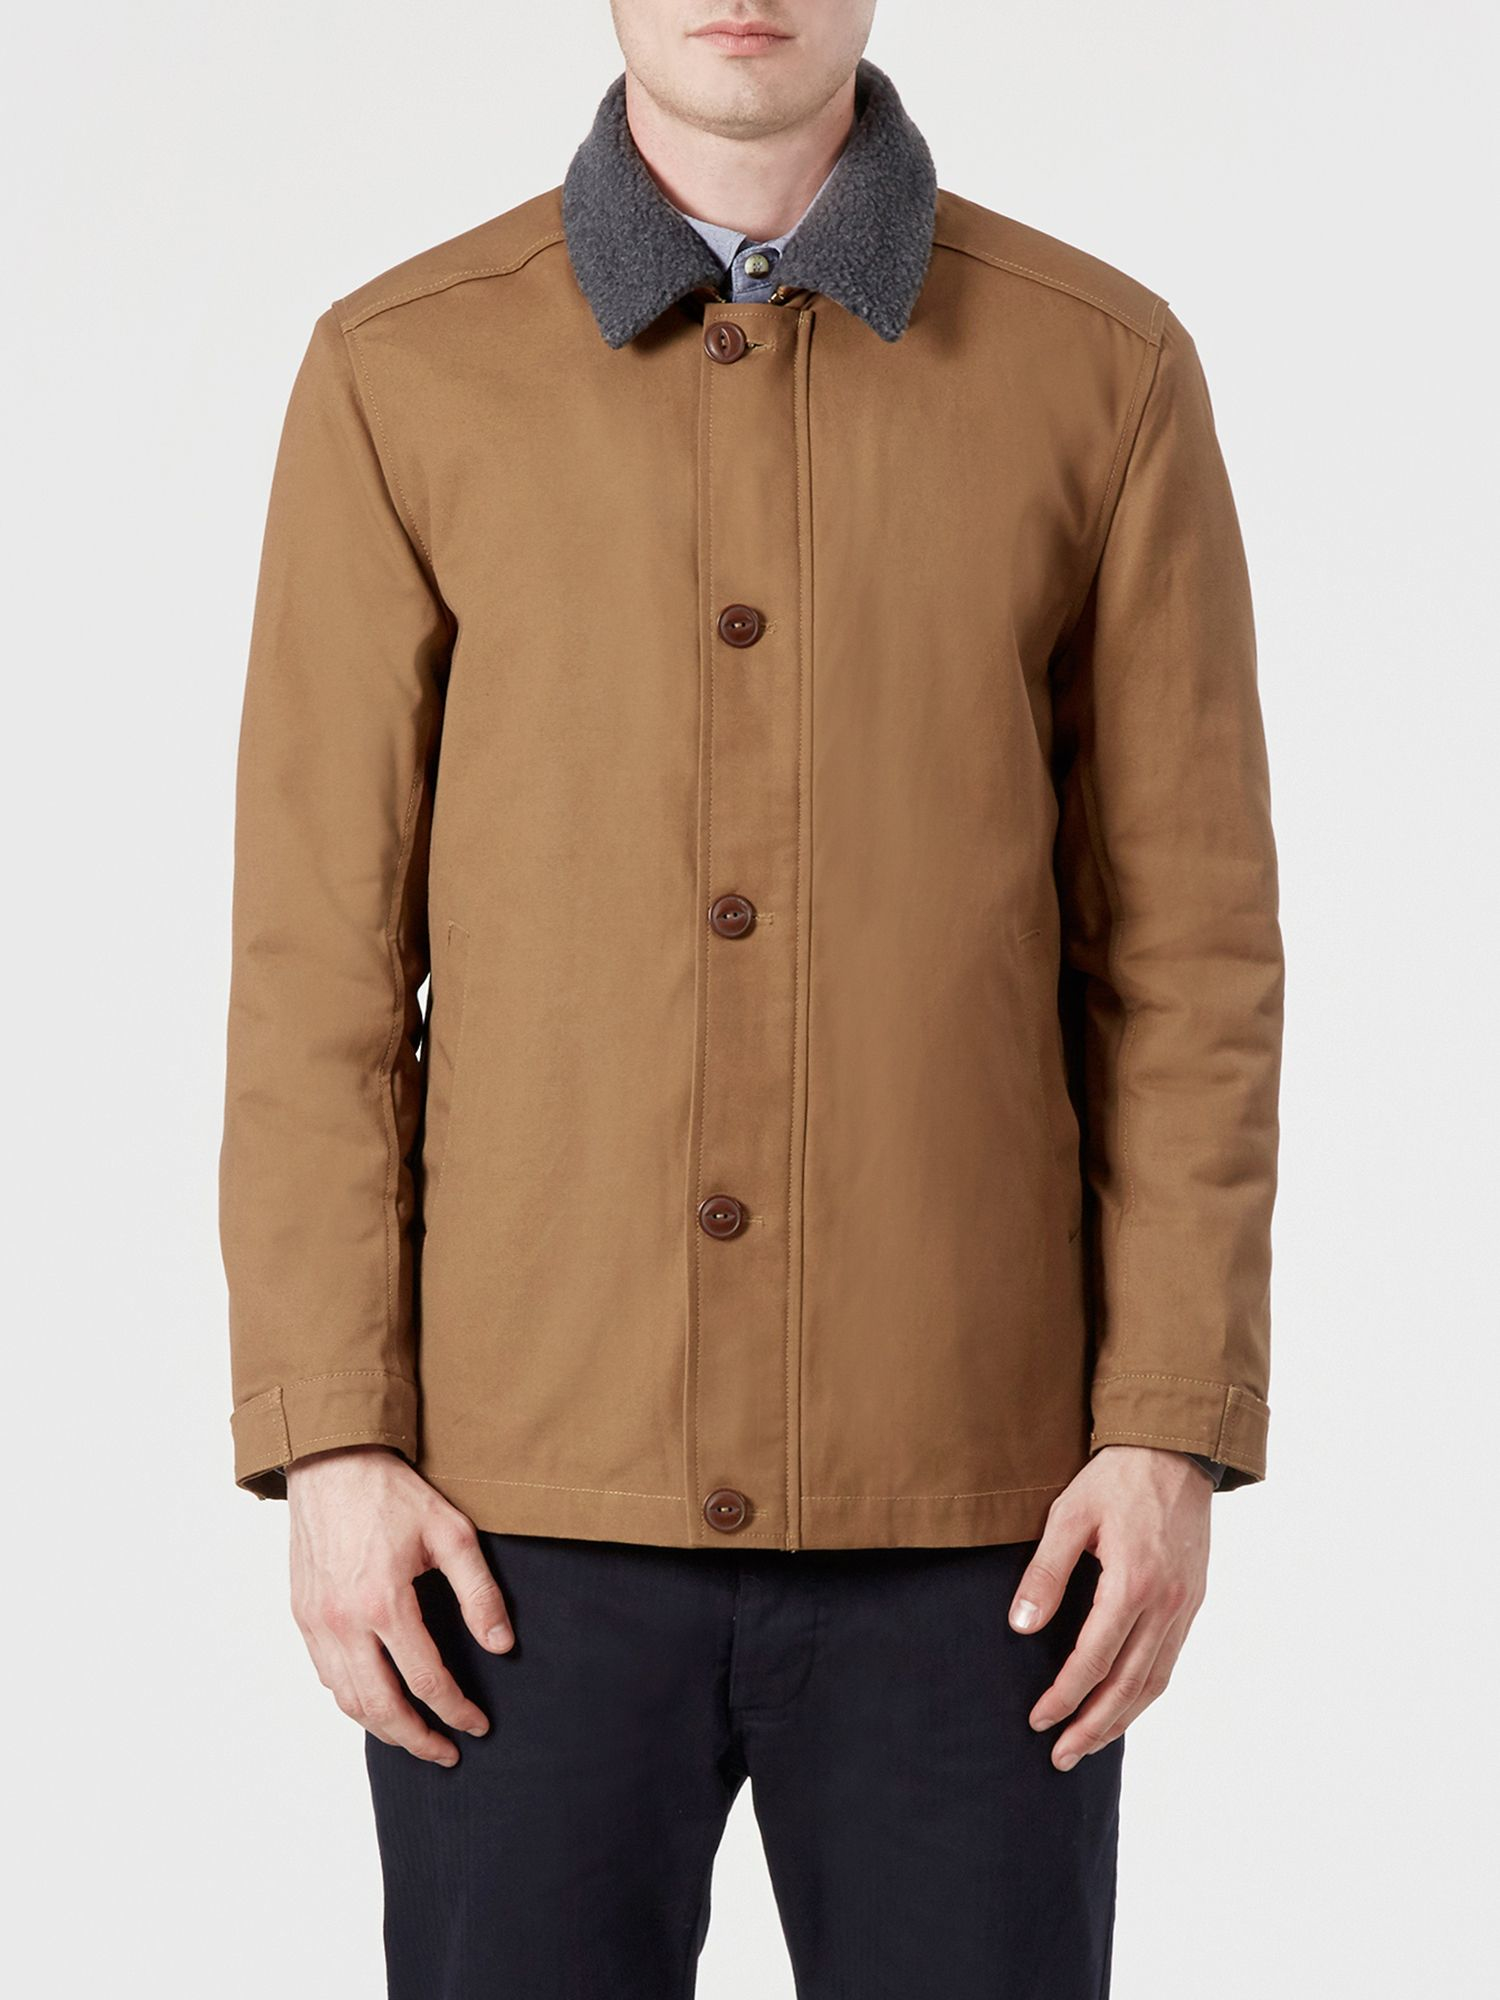 Realm & empire Car Coat With Detachable Fleece Collar in Brown for